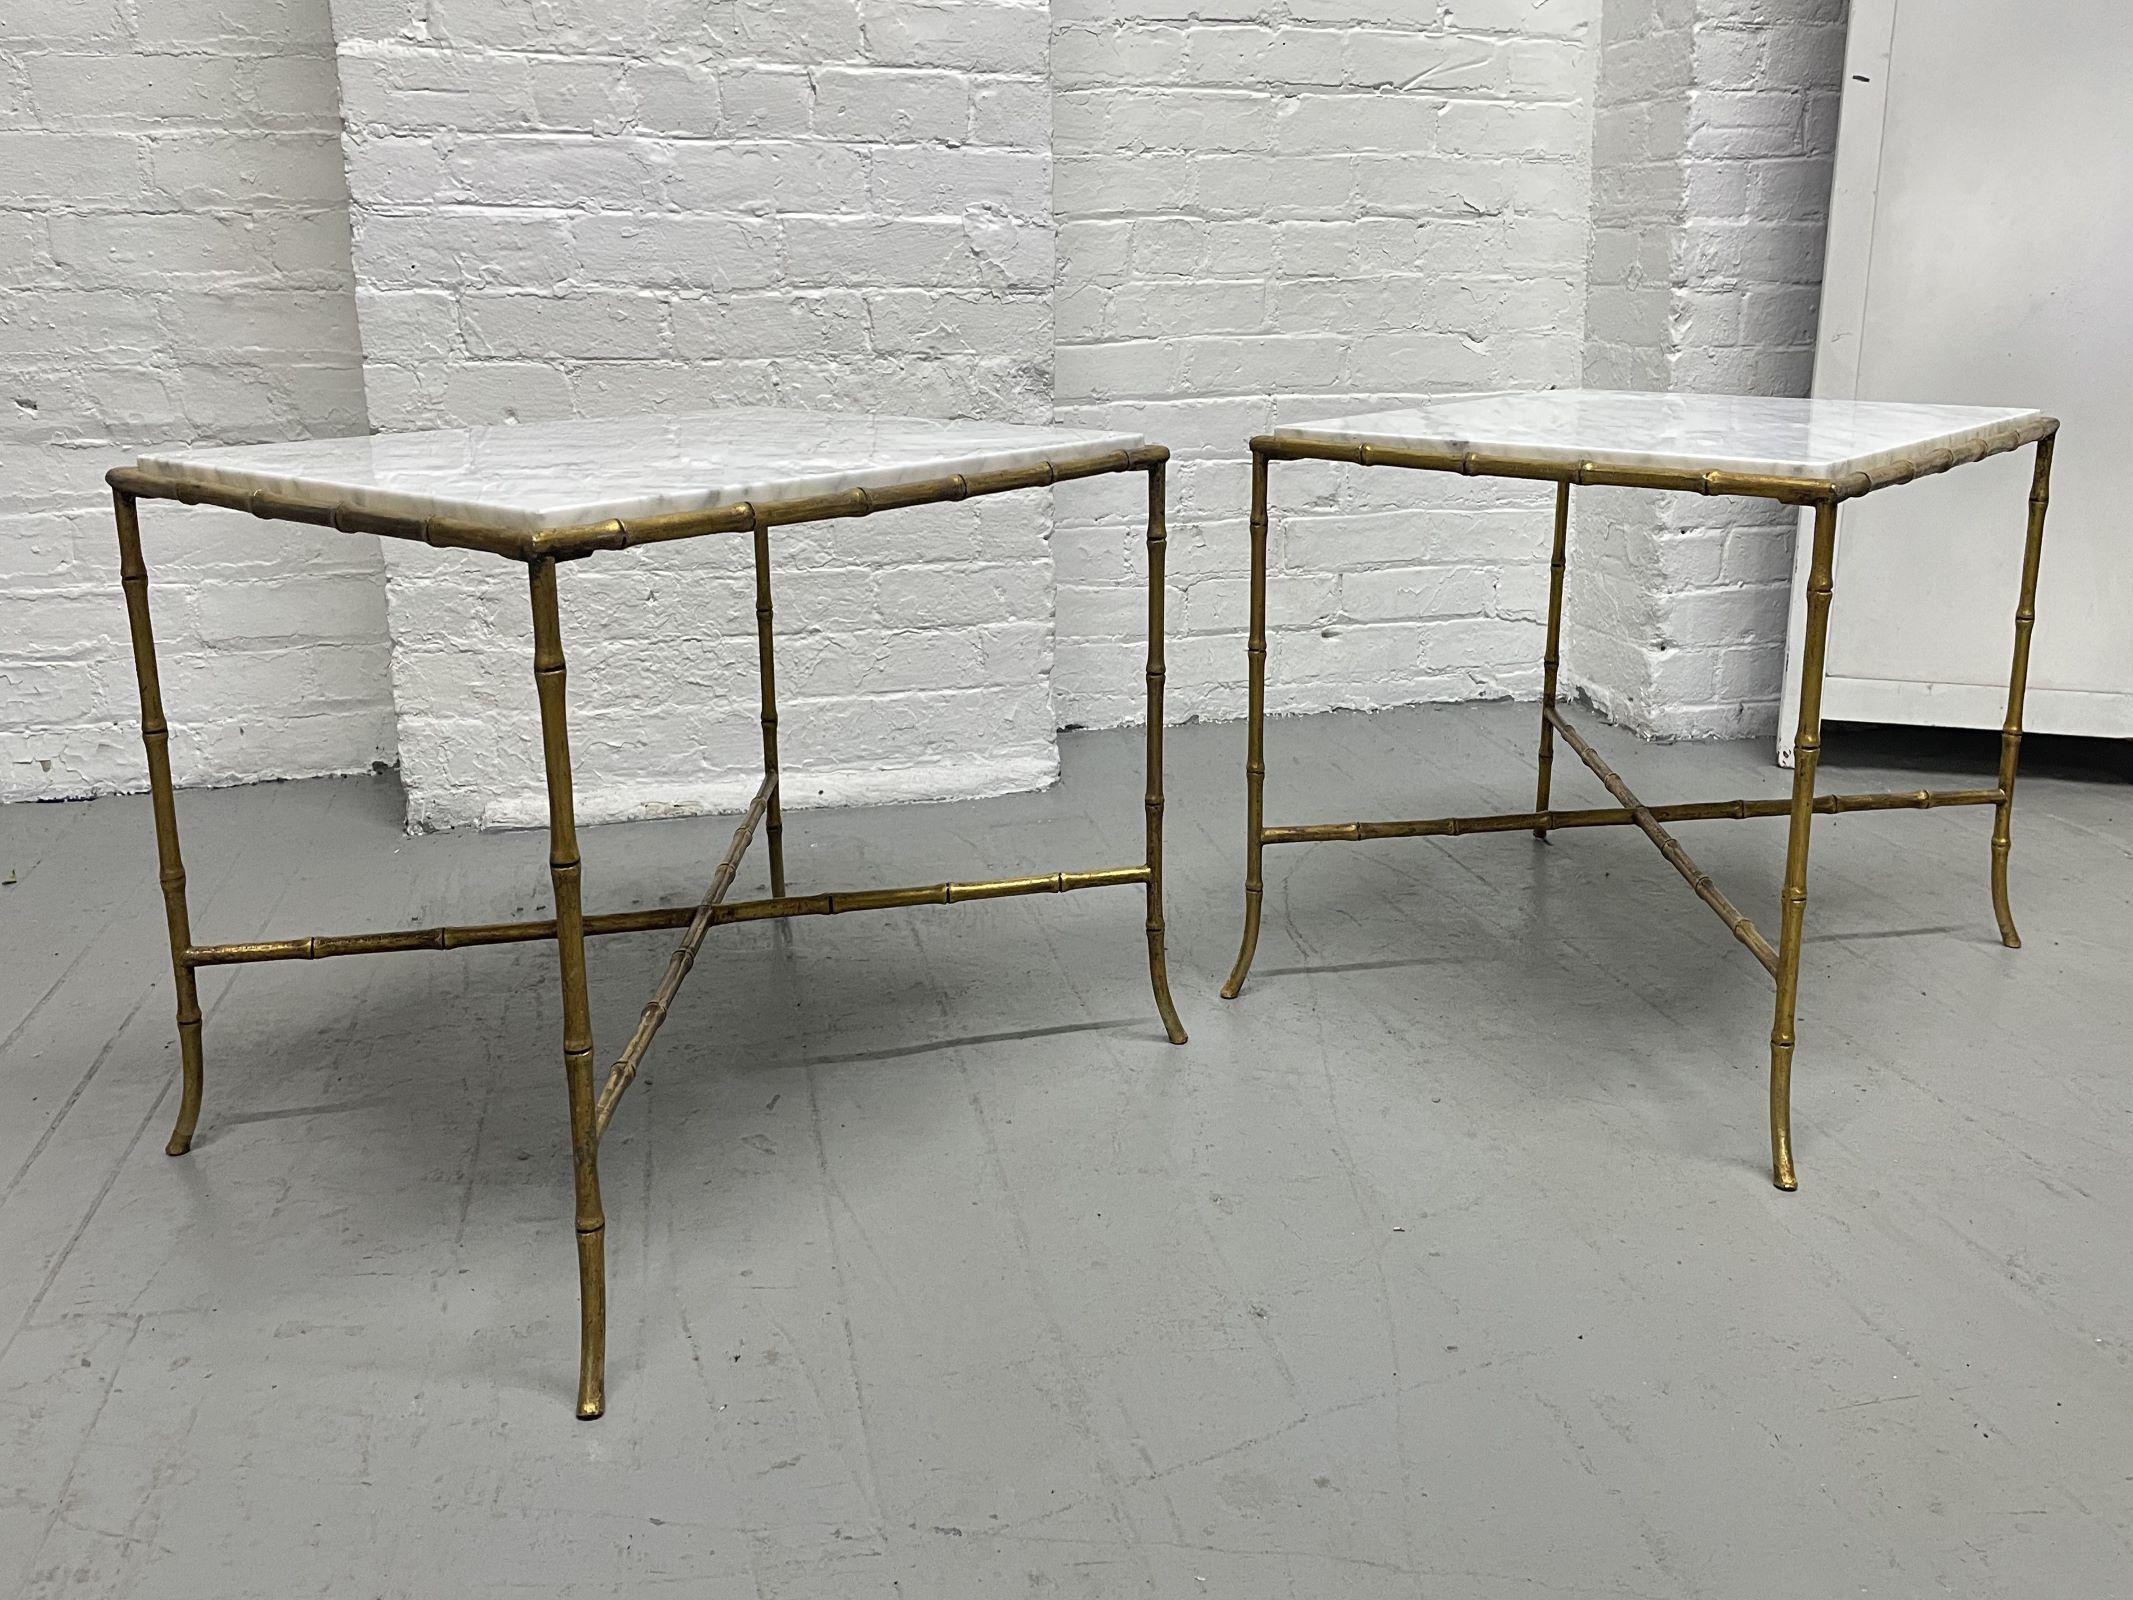 Pair of French Maison Bagues Carrara marble top gilt iron faux bamboo end tables or side tables. The tables have 